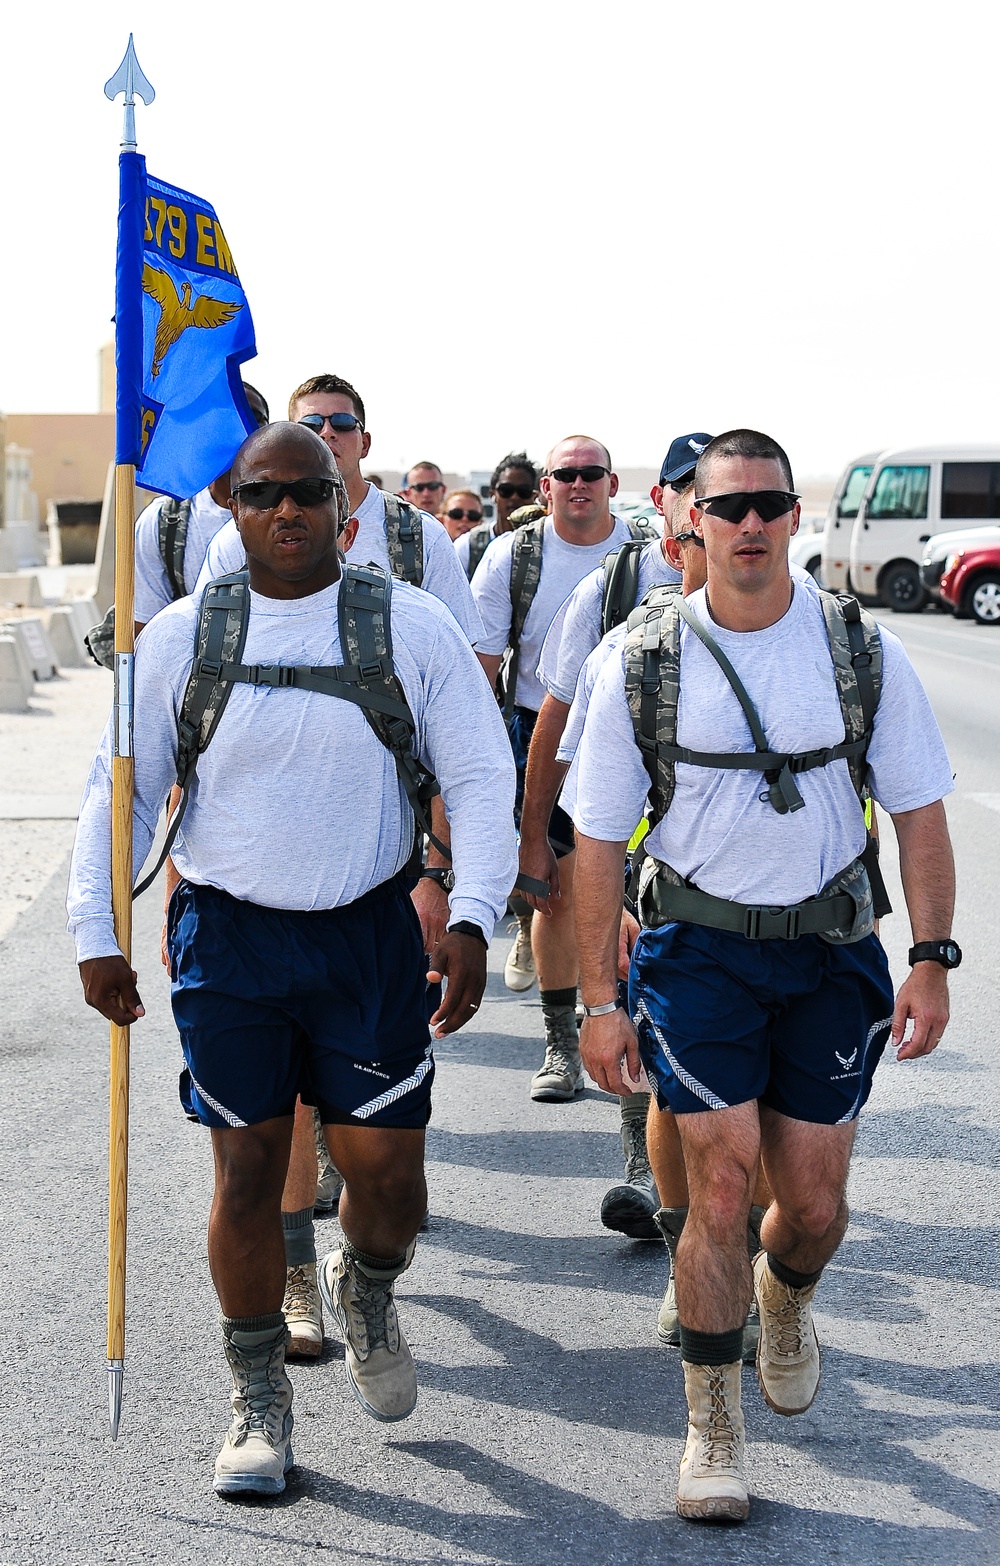 Ruck to remember